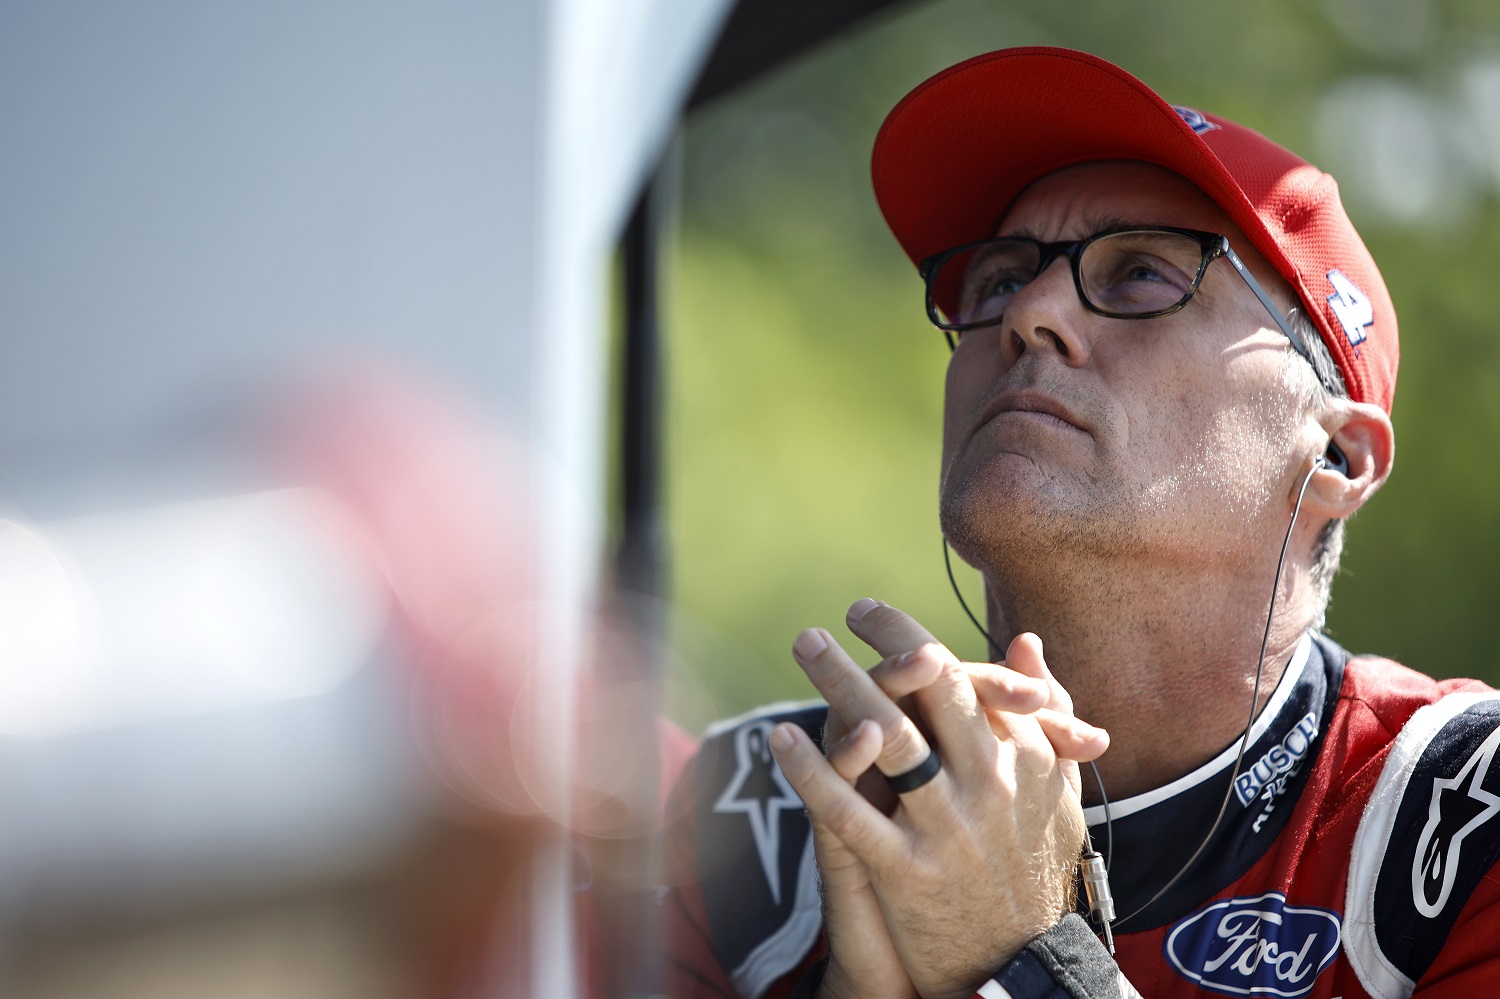 Kevin Harvick looks on during practice for the NASCAR Cup Series Kwik Trip 250 at Road America on July 2, 2022, in Elkhart Lake, Wisconsin.